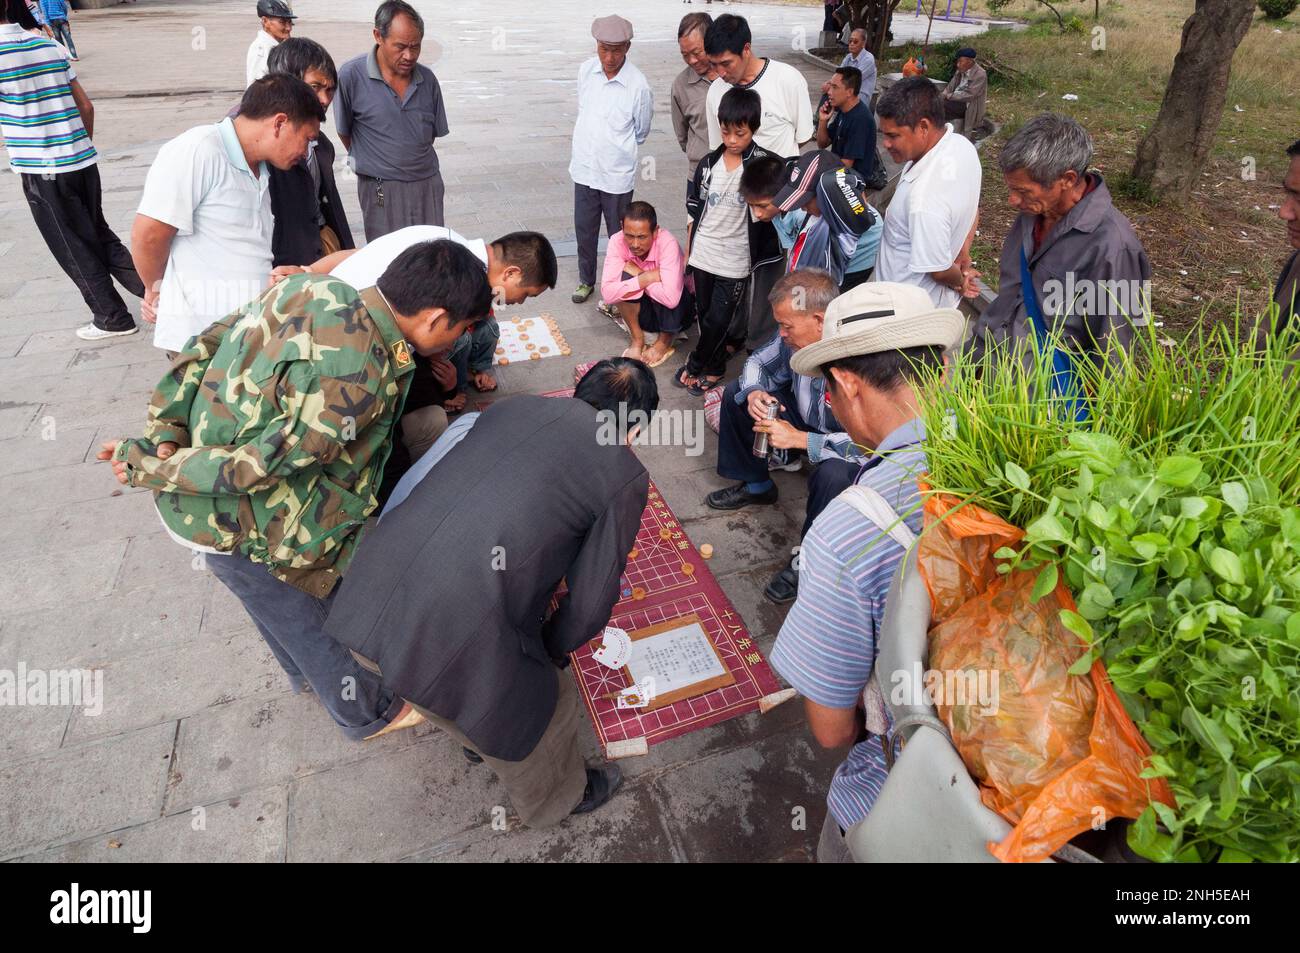 A group of men gathered to watch a a game of Chinese chess in an old town street in the city of Jianshui, Yunnan province China Stock Photo